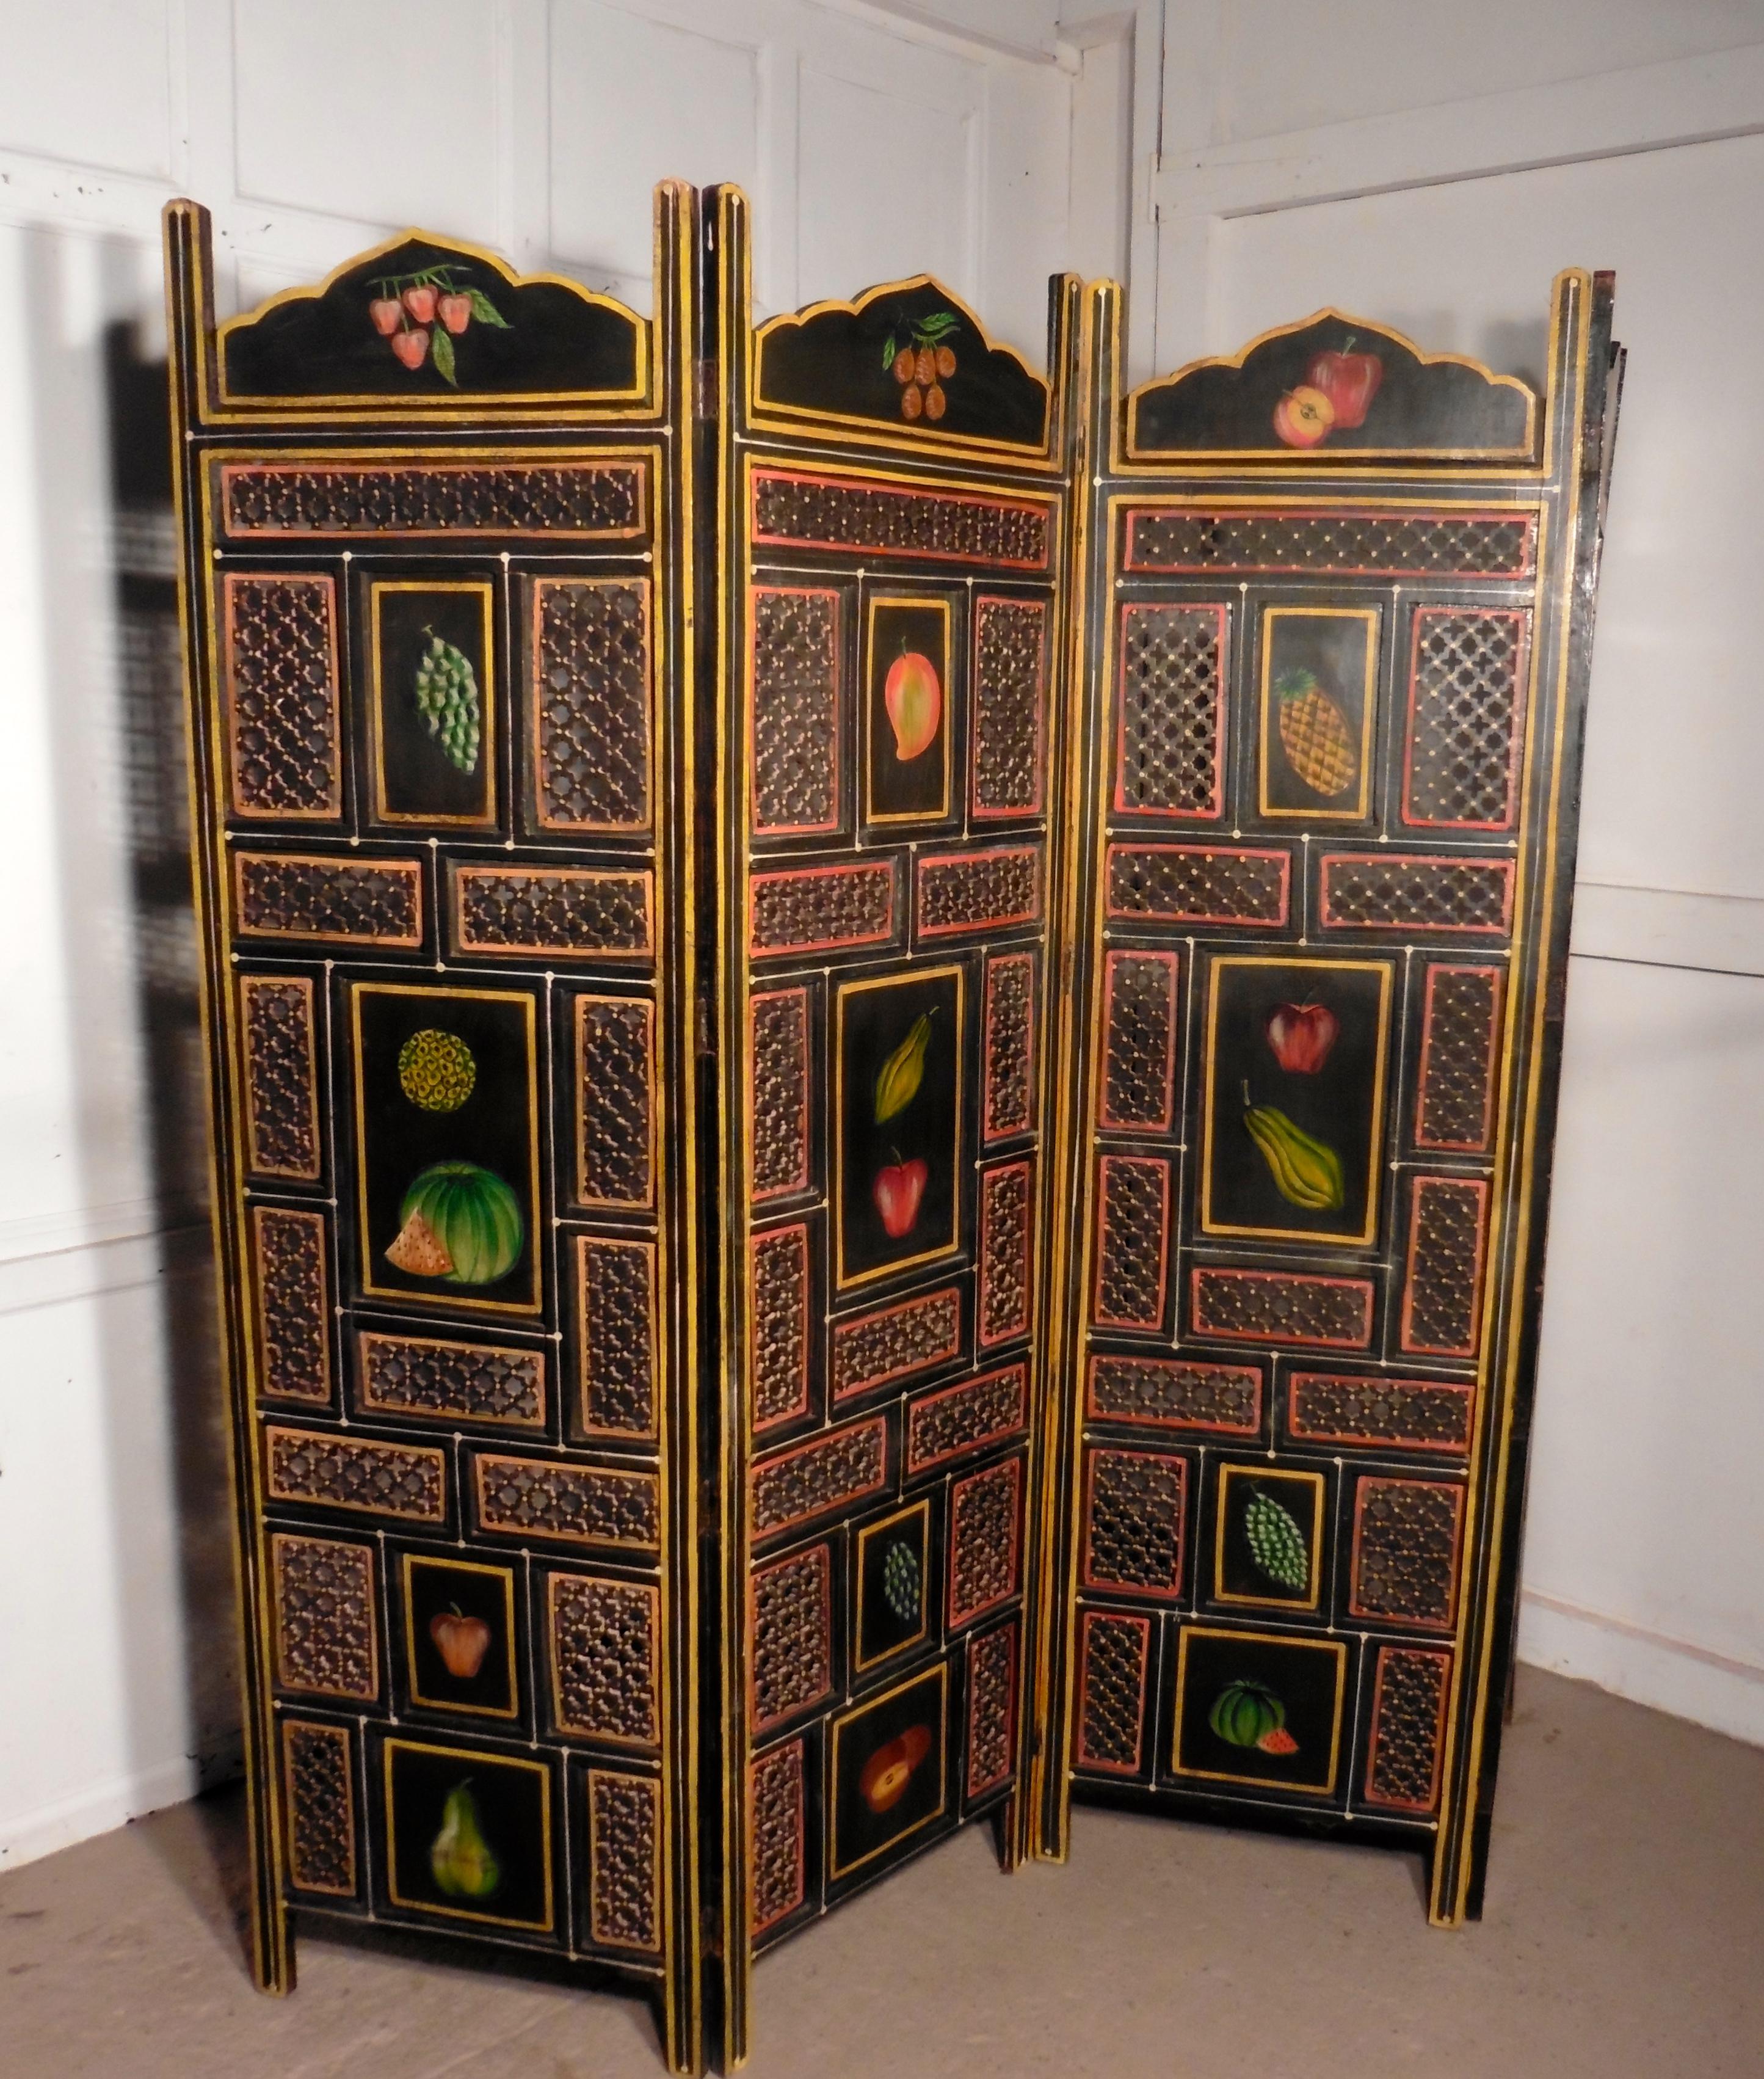 A large 19th century North African Folk Art pierced, painted 4-fold screen

This is a very heavy piece it has been handmade in hard wood and painted in traditional colours, the paint now has developed a genuine shabby but still colorful